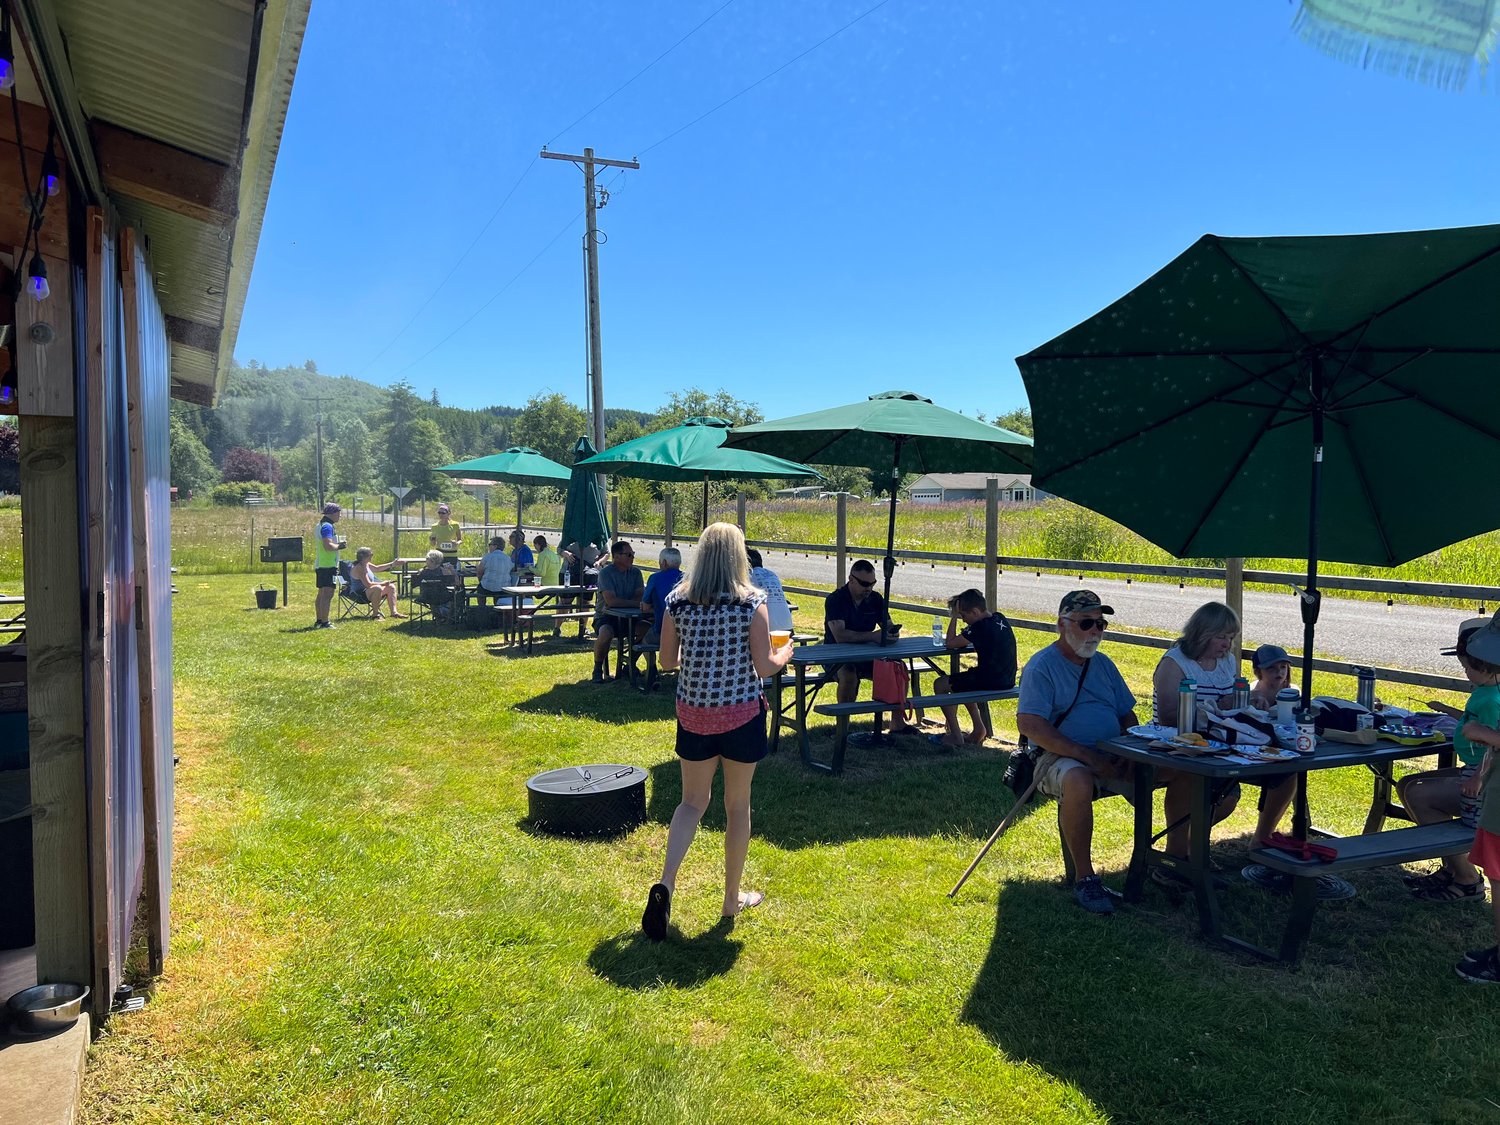 Cyclists and members of the public eat lunch at Jones Creek Brewing in Pe Ell. Jones Creek served as a rest stop for the ride and also hosted a pop-up market.